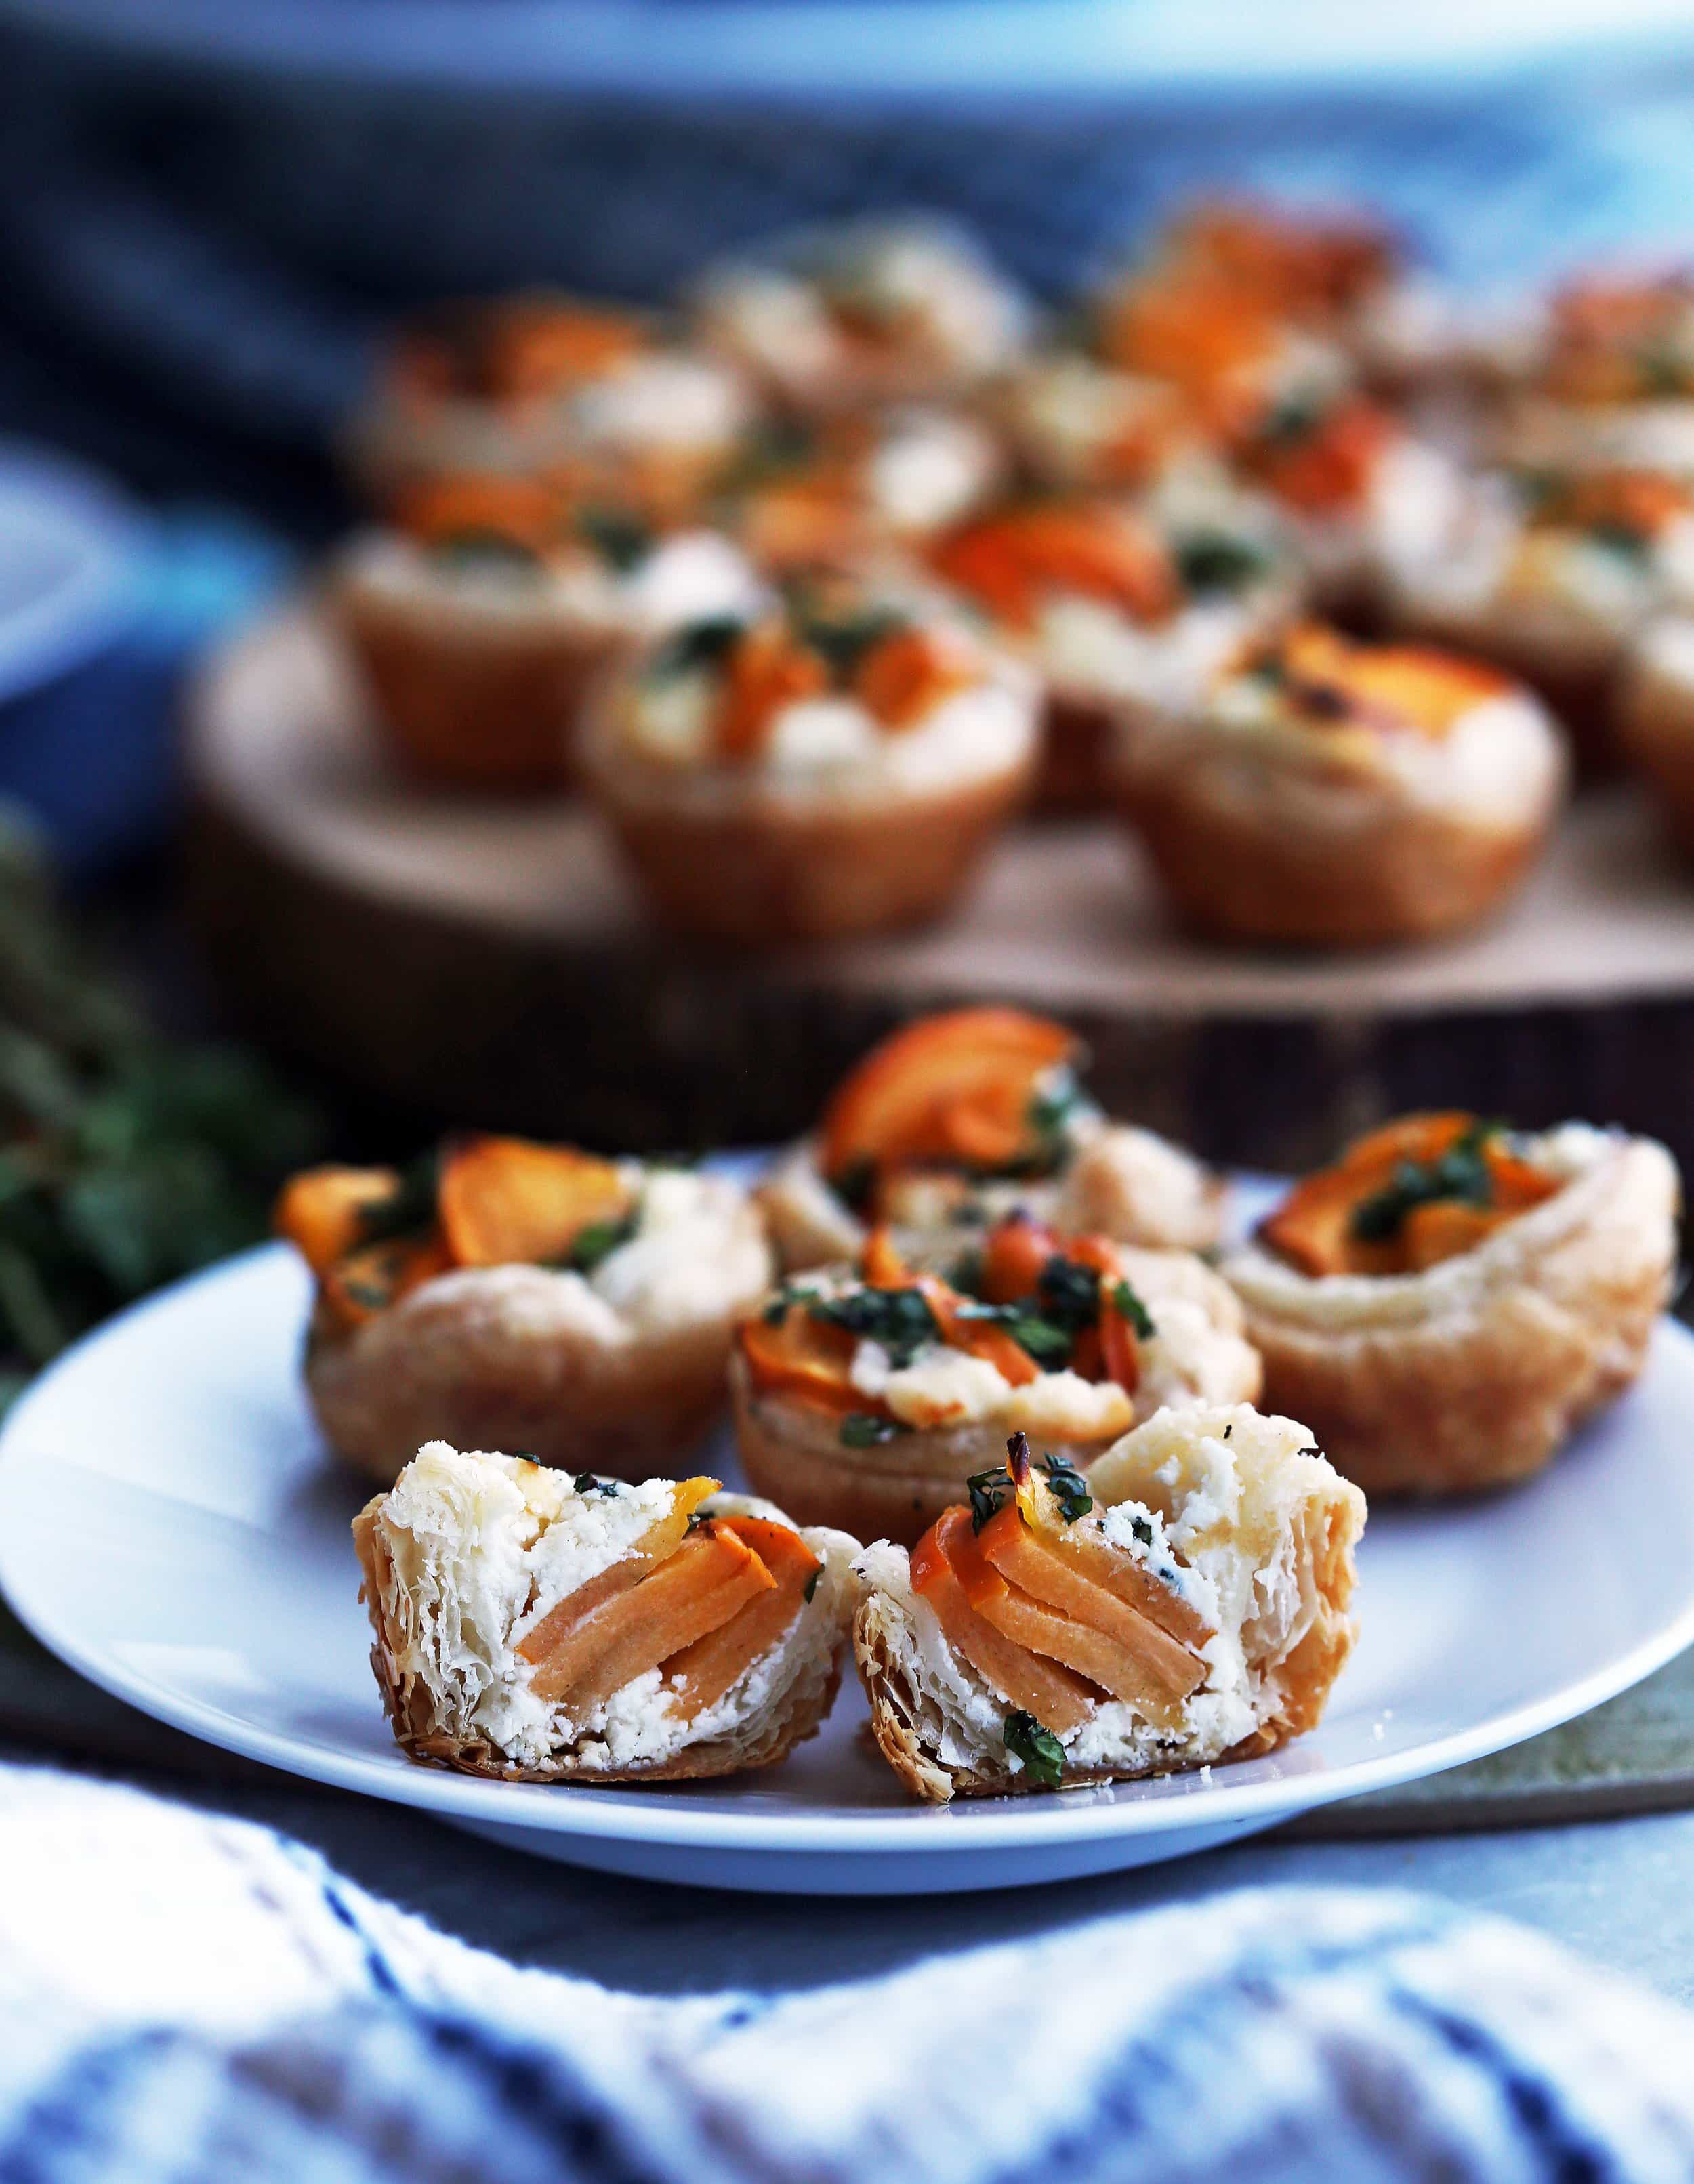 Five Persimmon Goat Cheese Tartlets on a white plate with one tartlet cut in half.